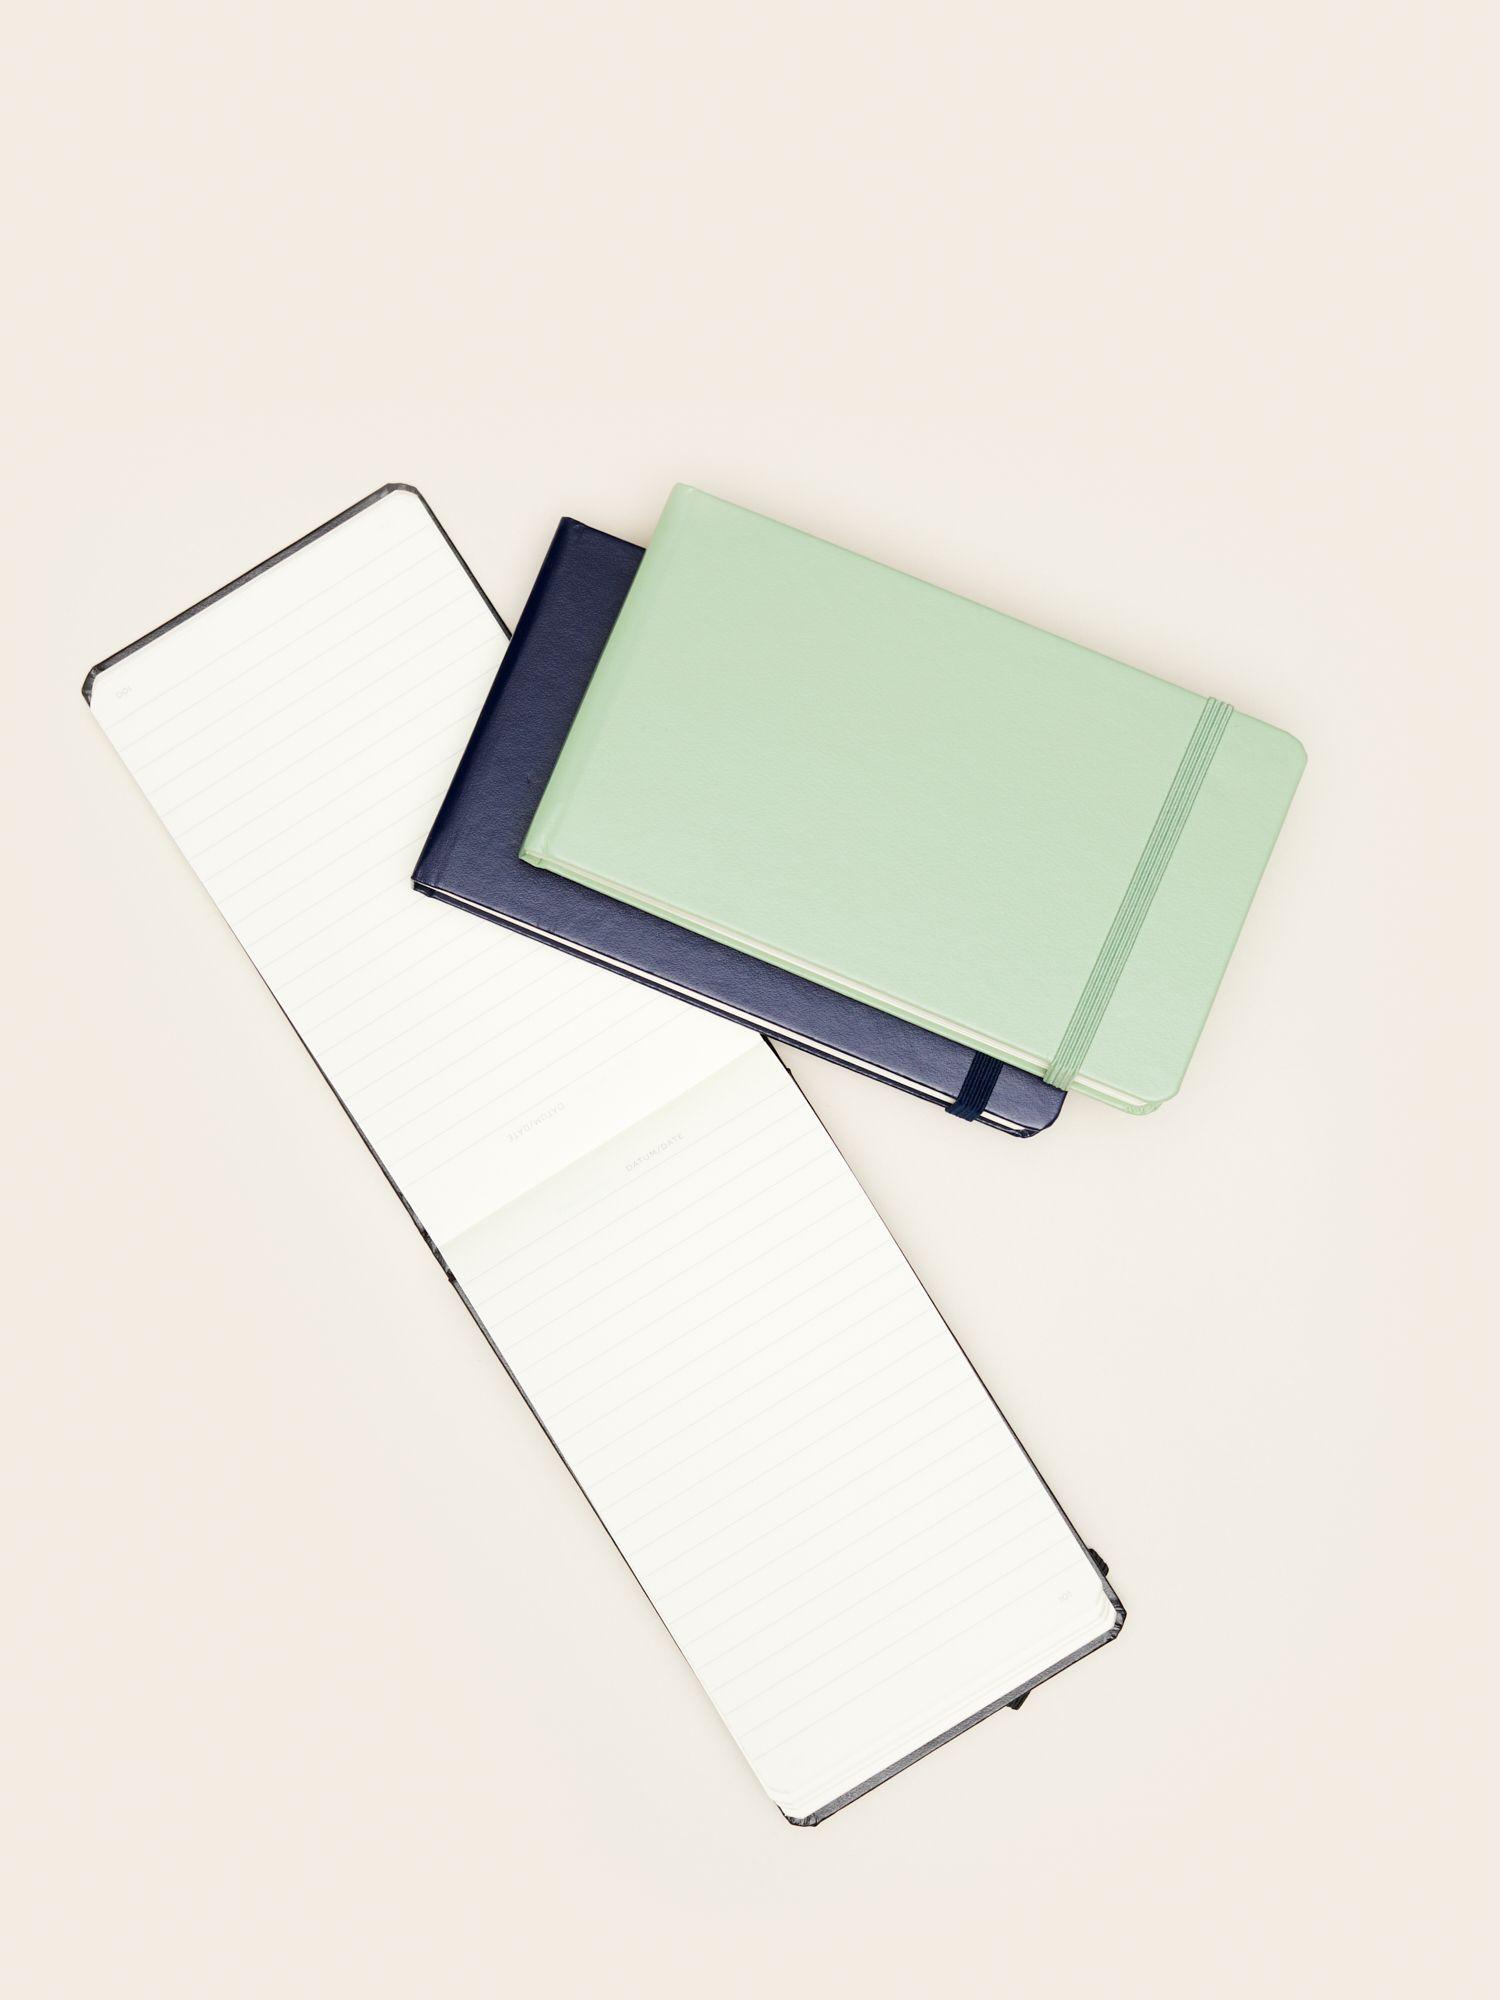 MERCHERY_Hard cover notepad_together_top.jpg